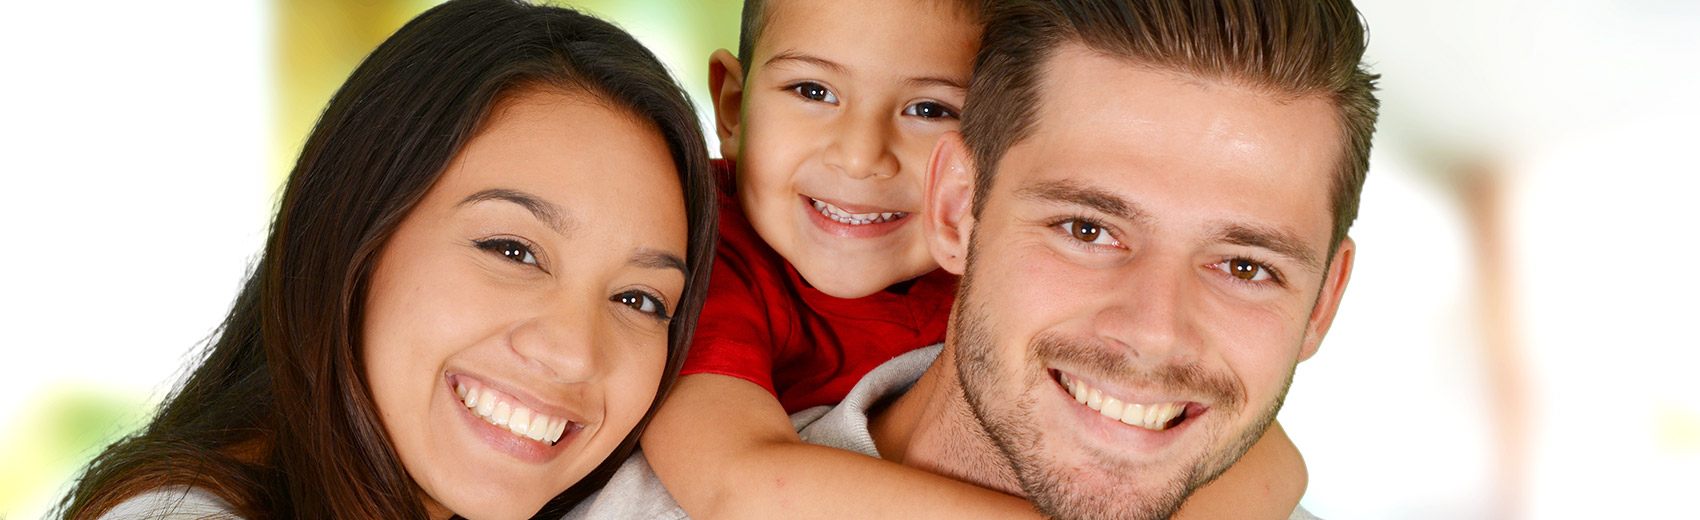 Dentistry for the whole family - Aesthetic Dental Creations